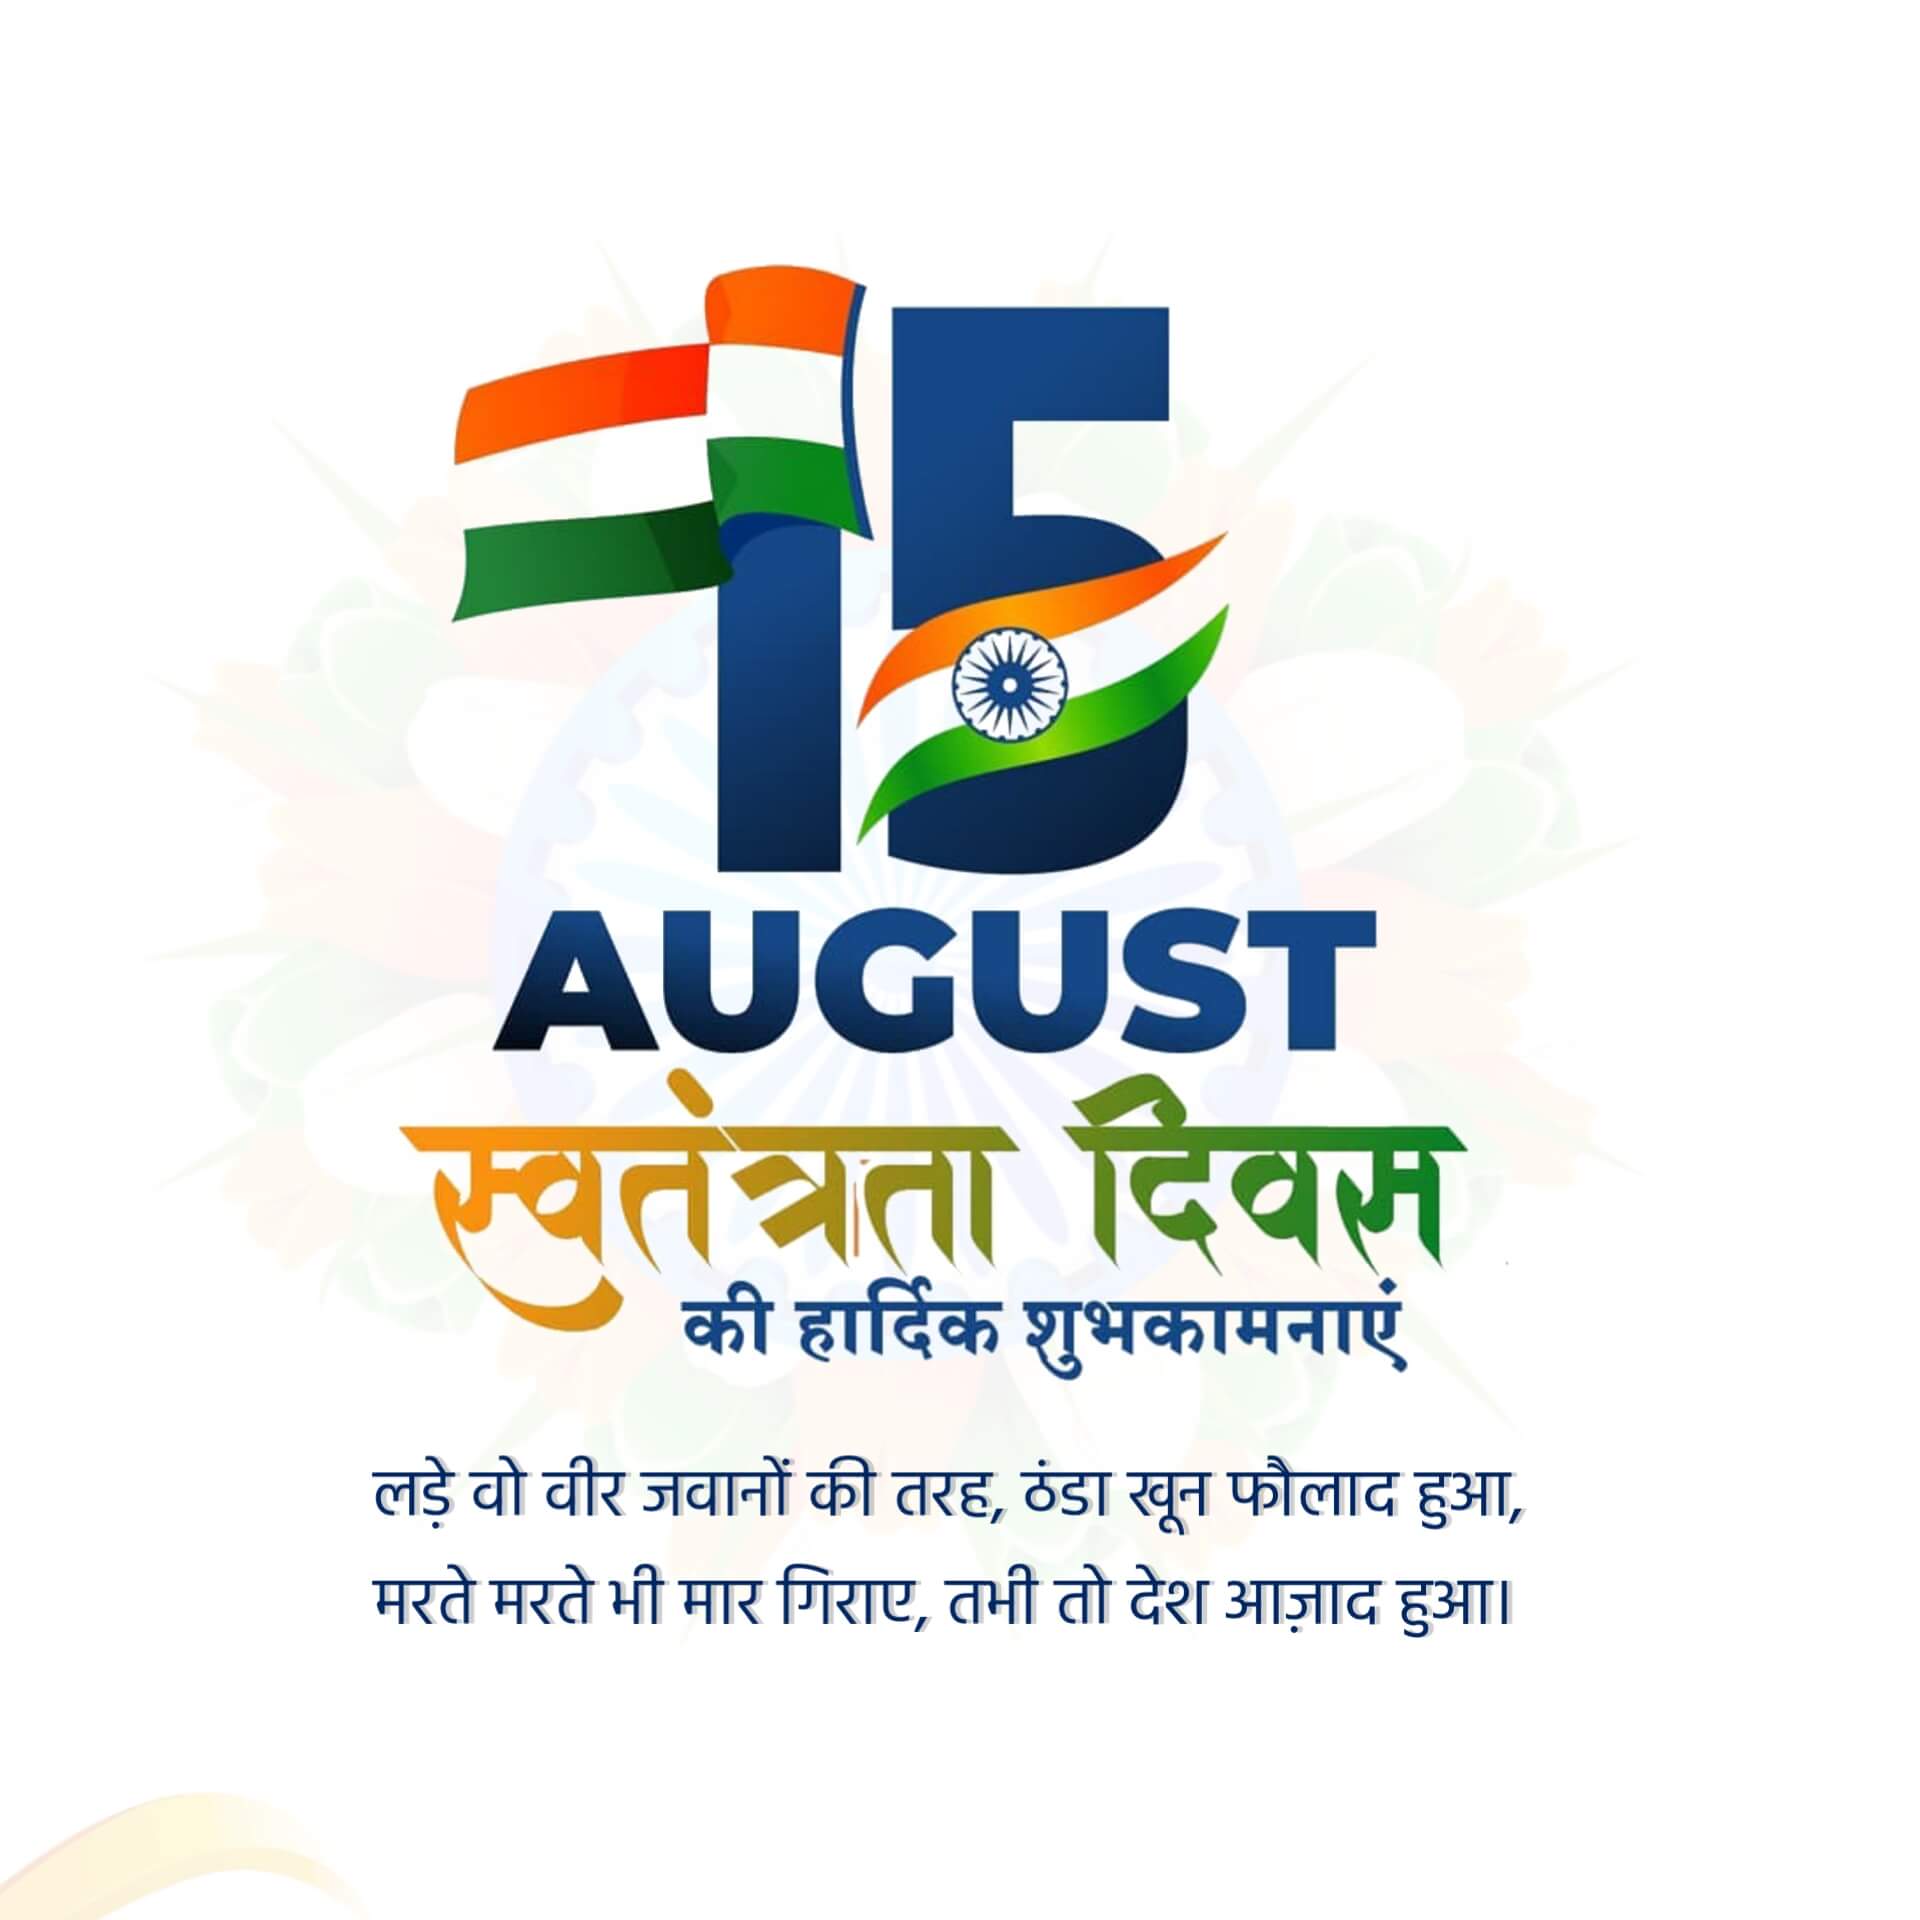 15 August Independence Day Image